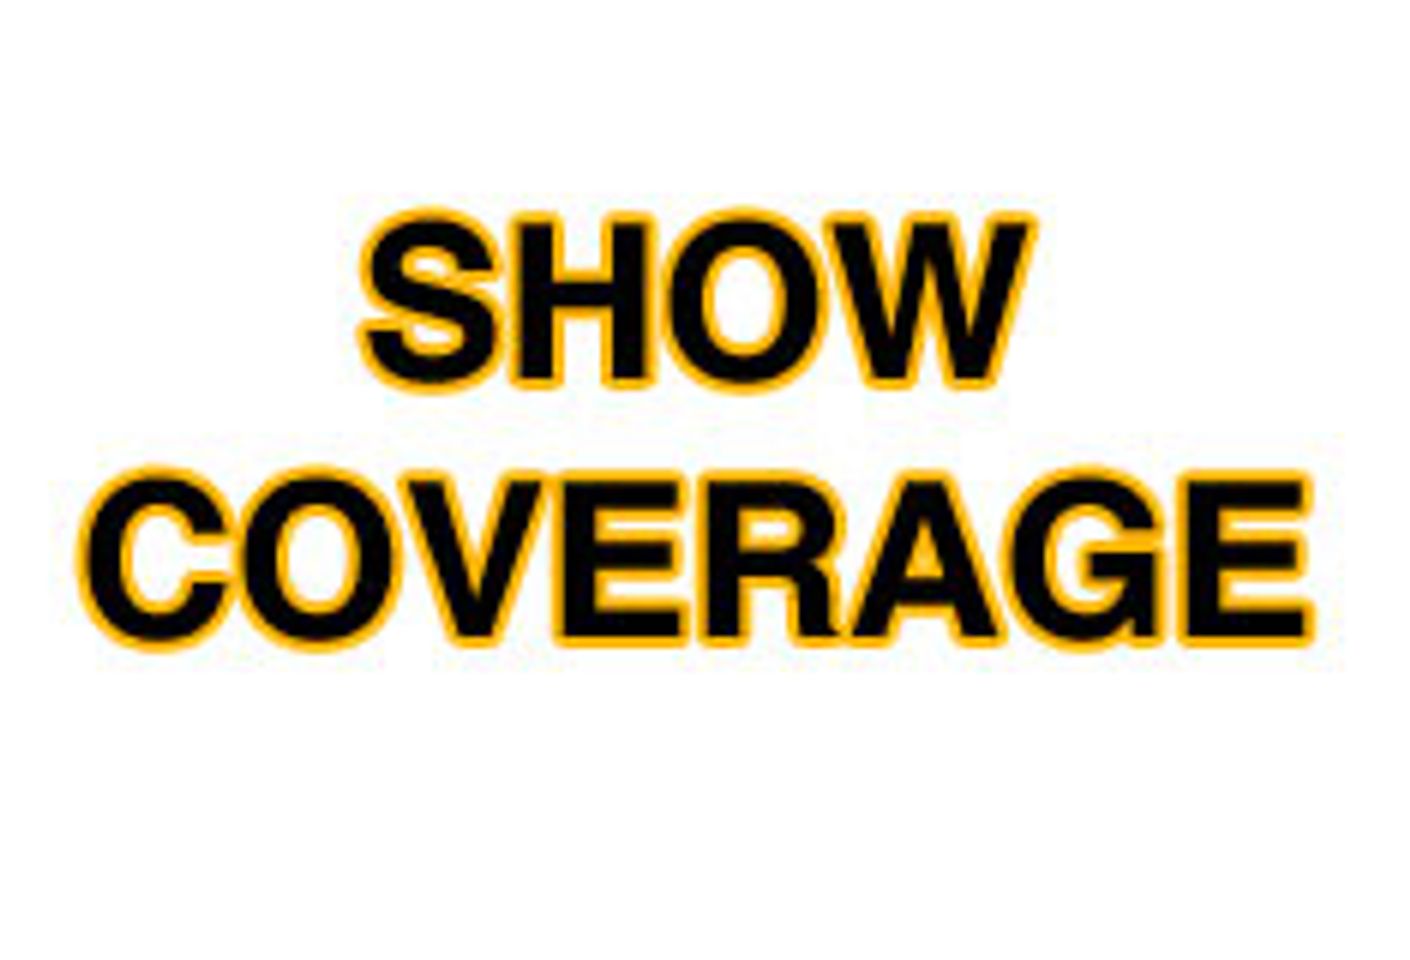 Show Coverage Available